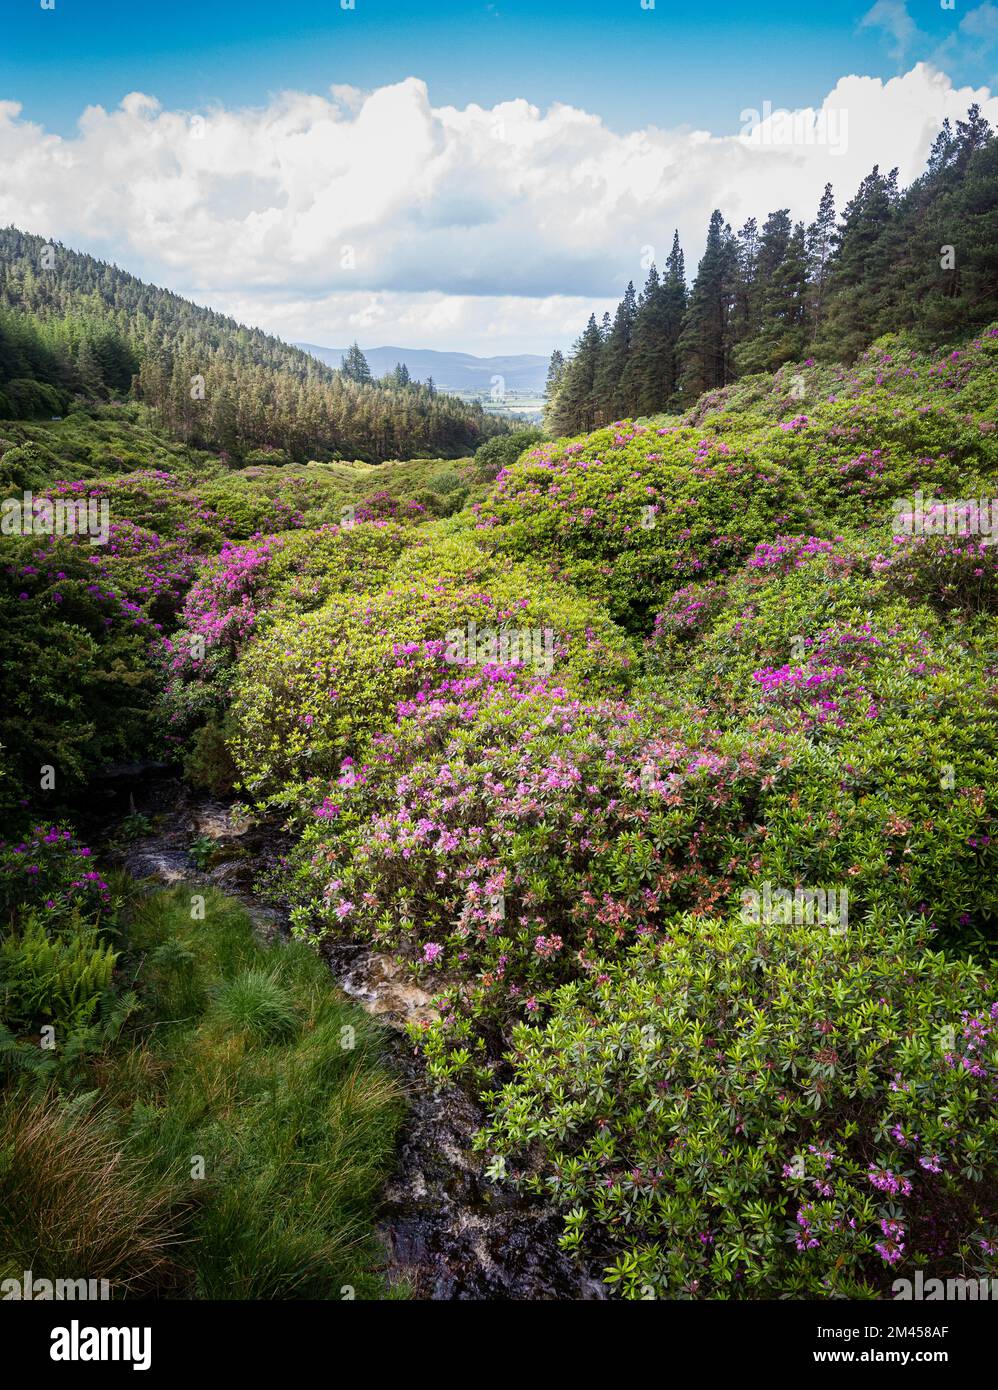 Scenic valley with colourful rhododendron bushes in the Vee, Knockmealdown Mountains, Ireland. Stock Photo